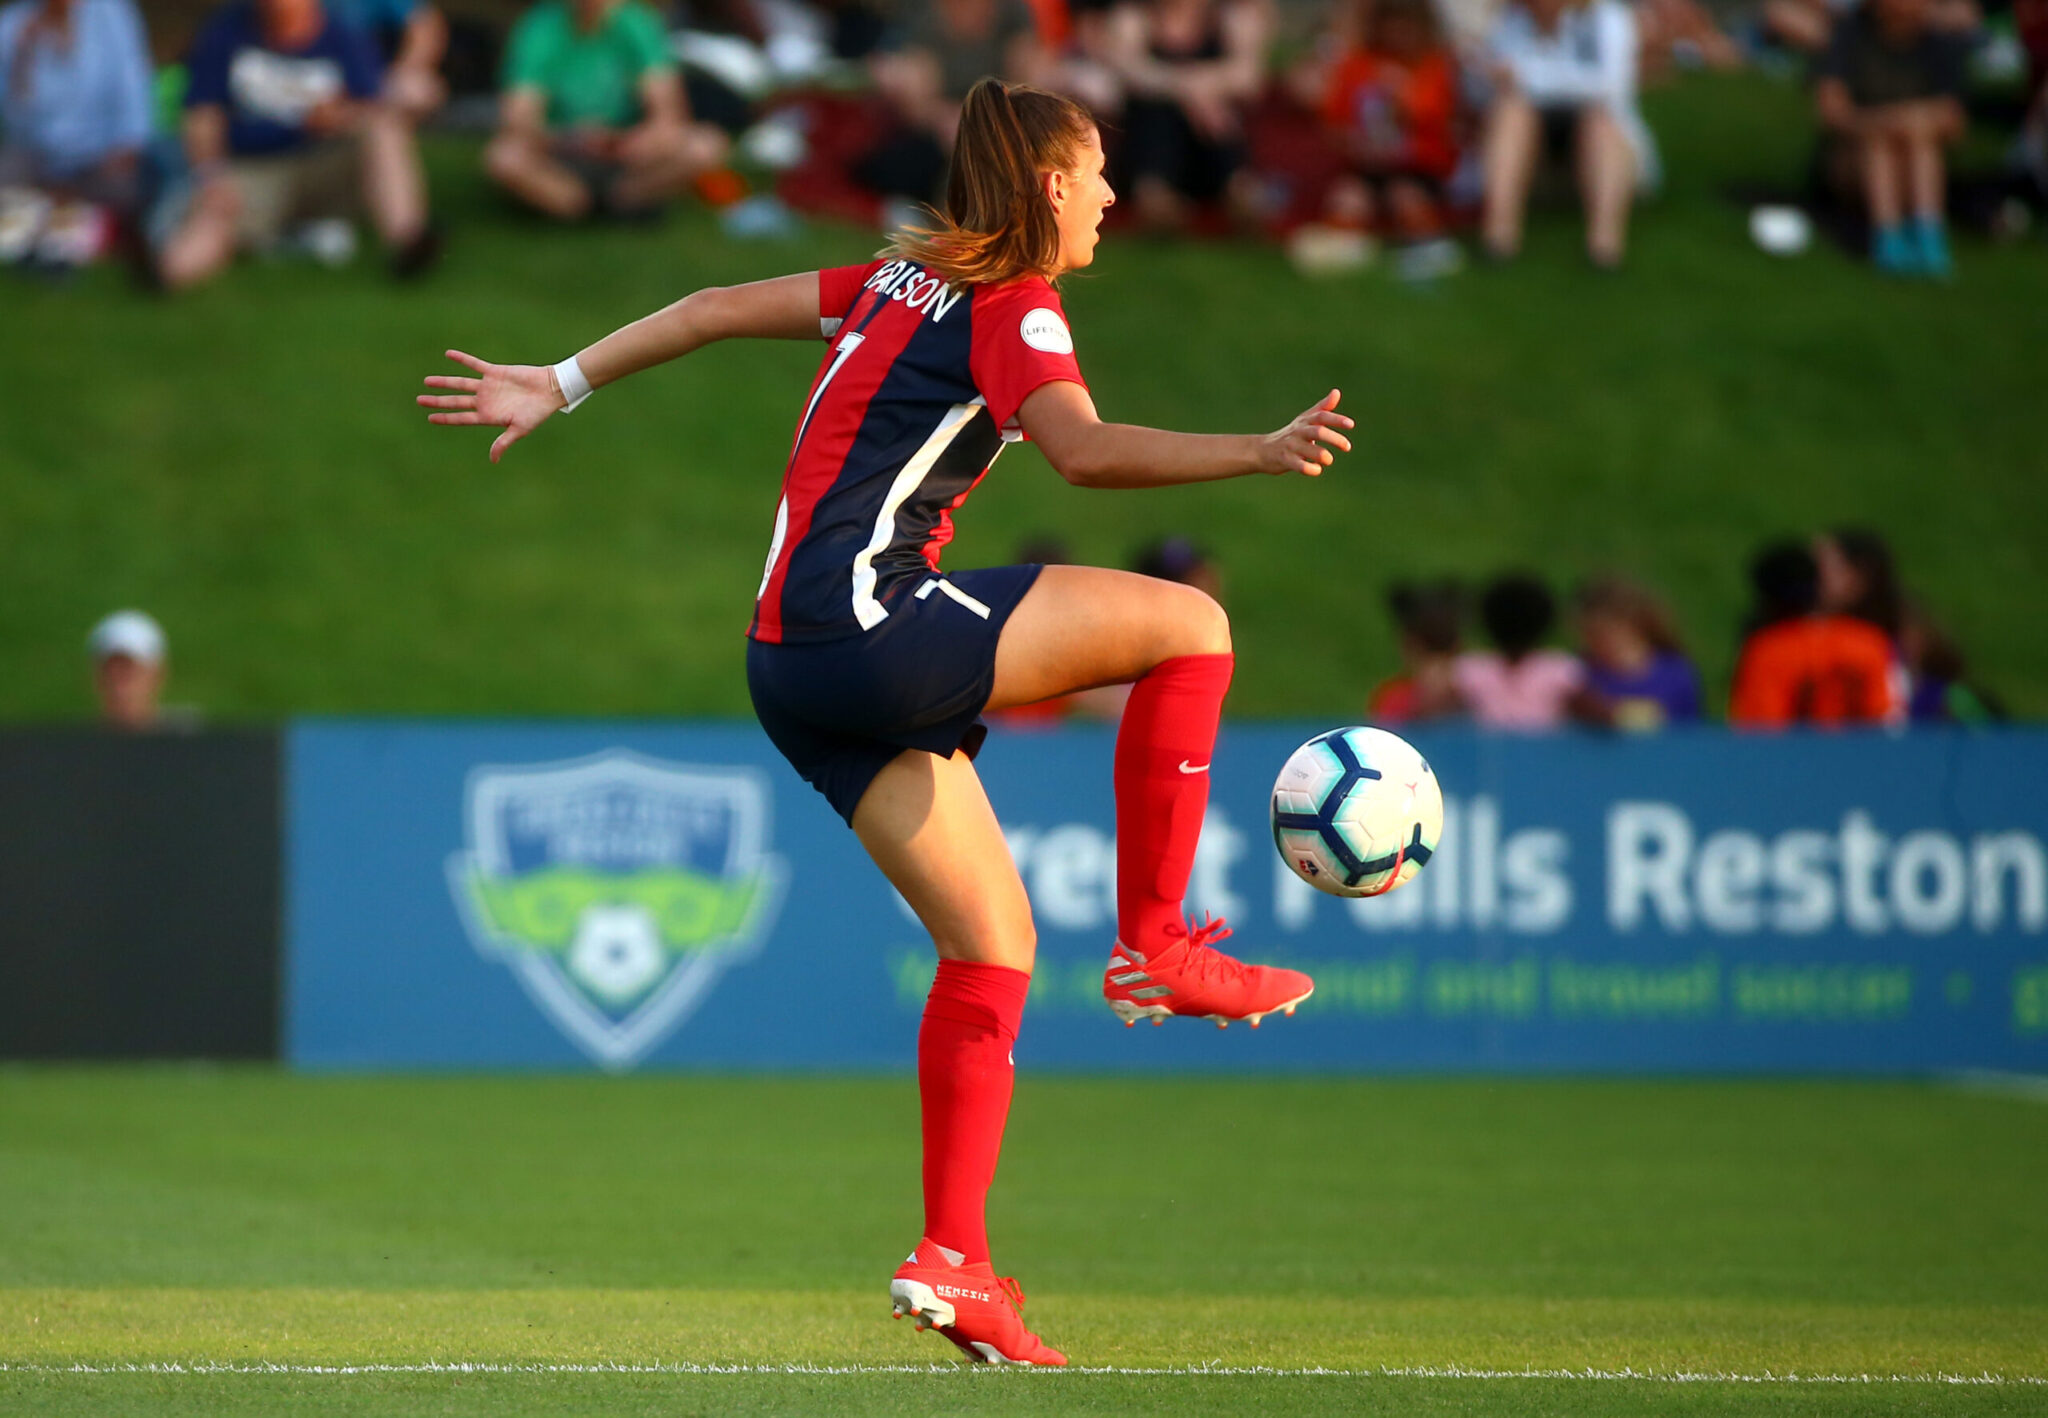 Amy Harrison is living her dream by representing her country in the 2019 World Cup Featured Image